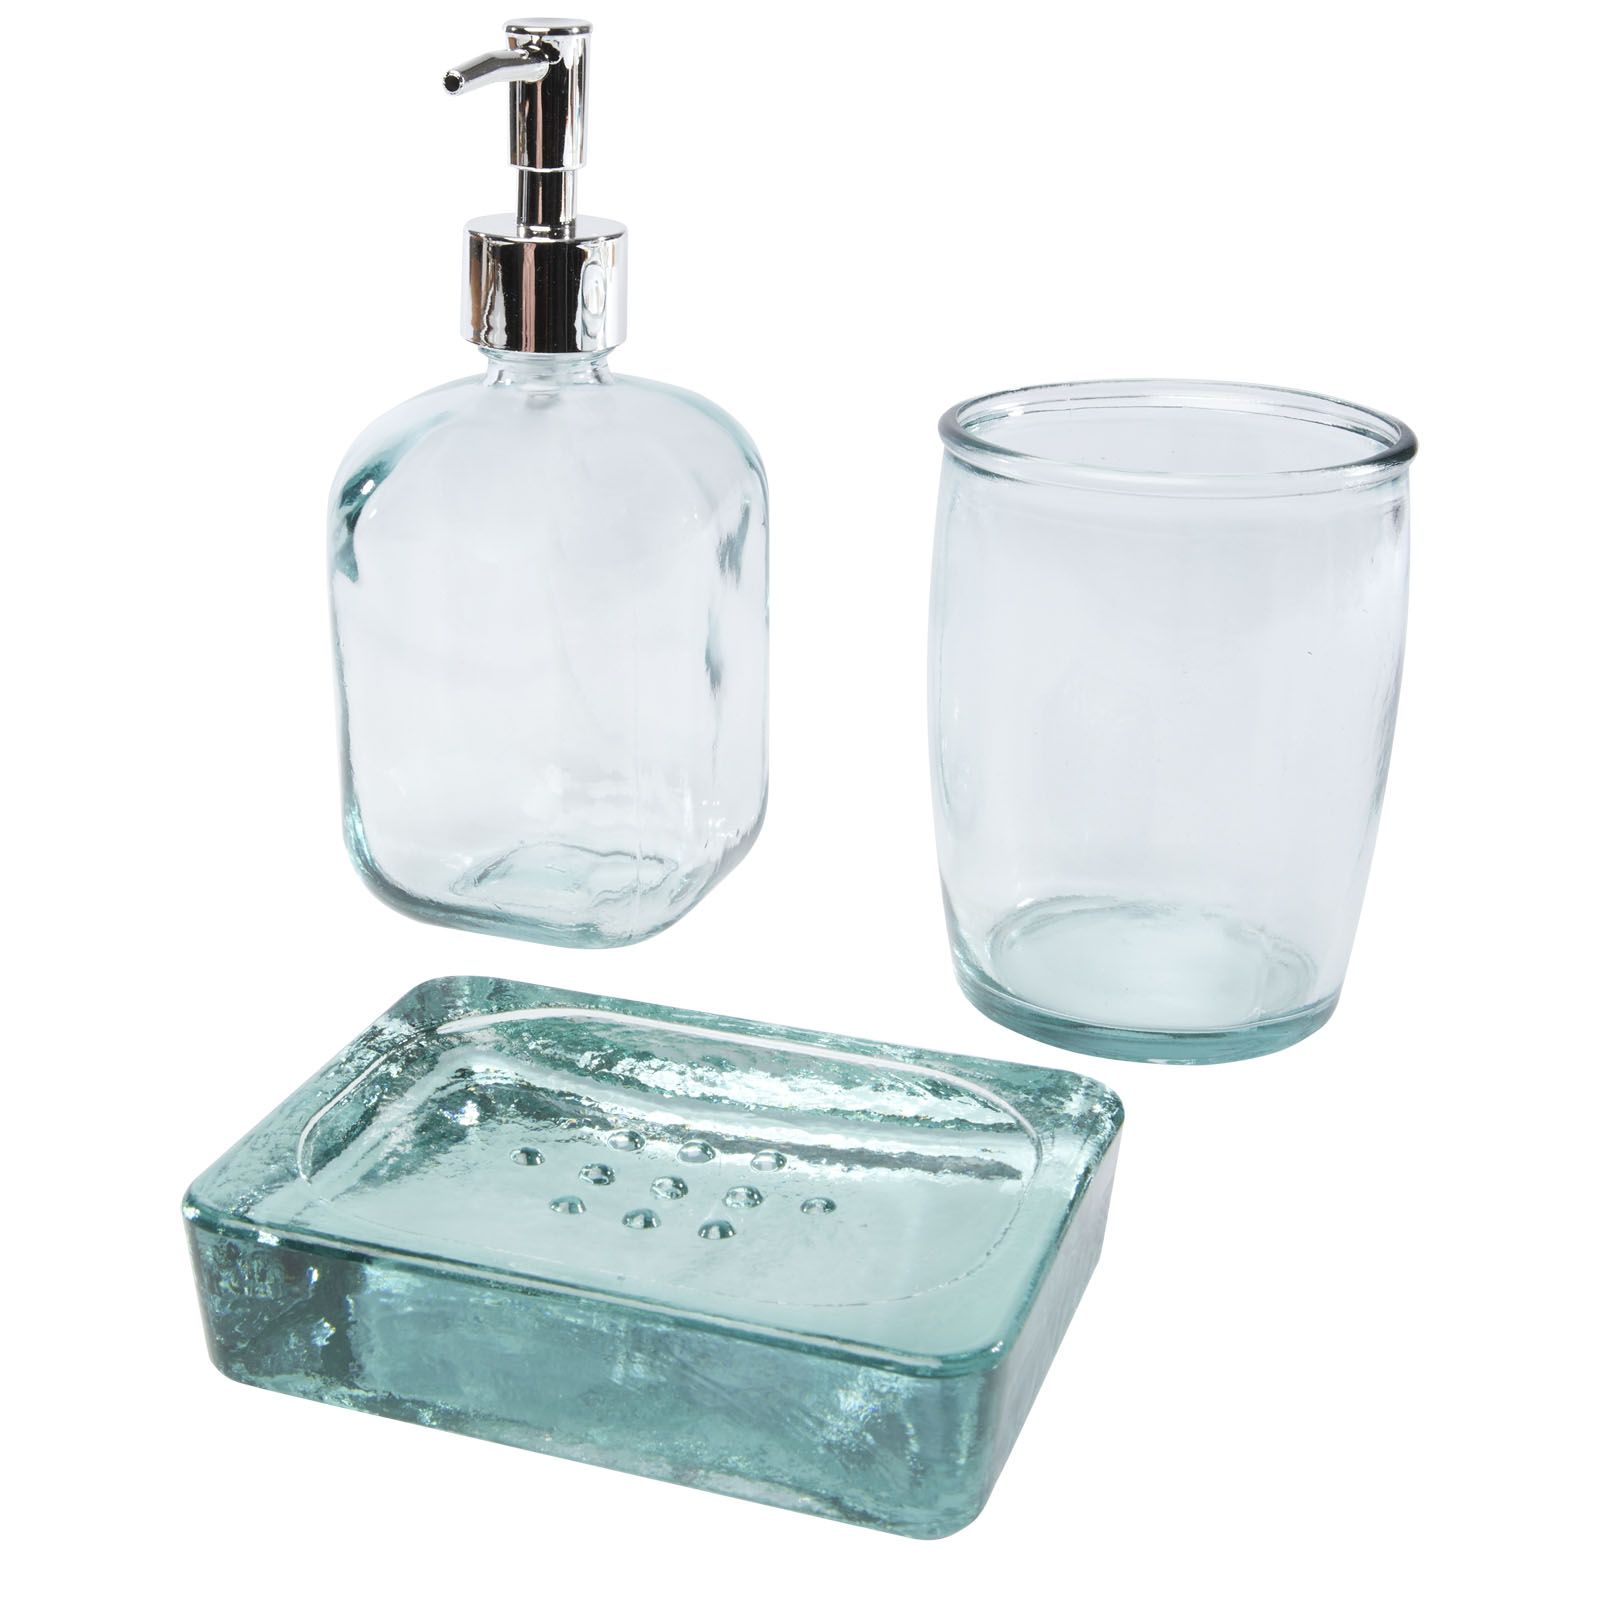 Glass bathroom set NITTY made of recycled glass, 3 pcs - transparent clear